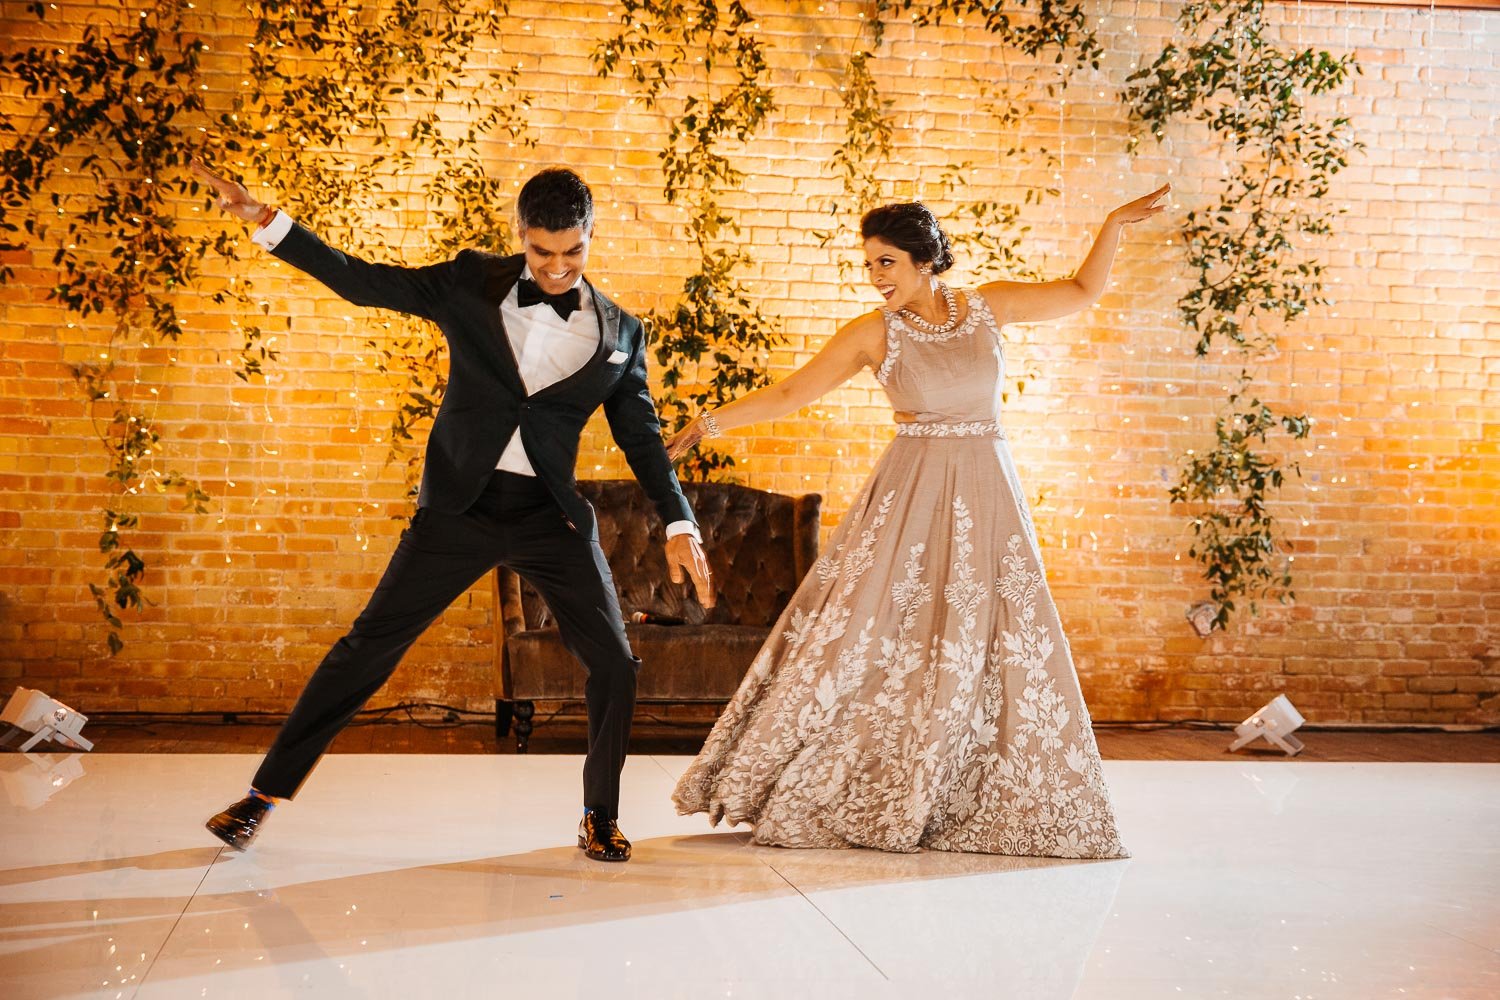 Couples choreographed first dance at wedding reception